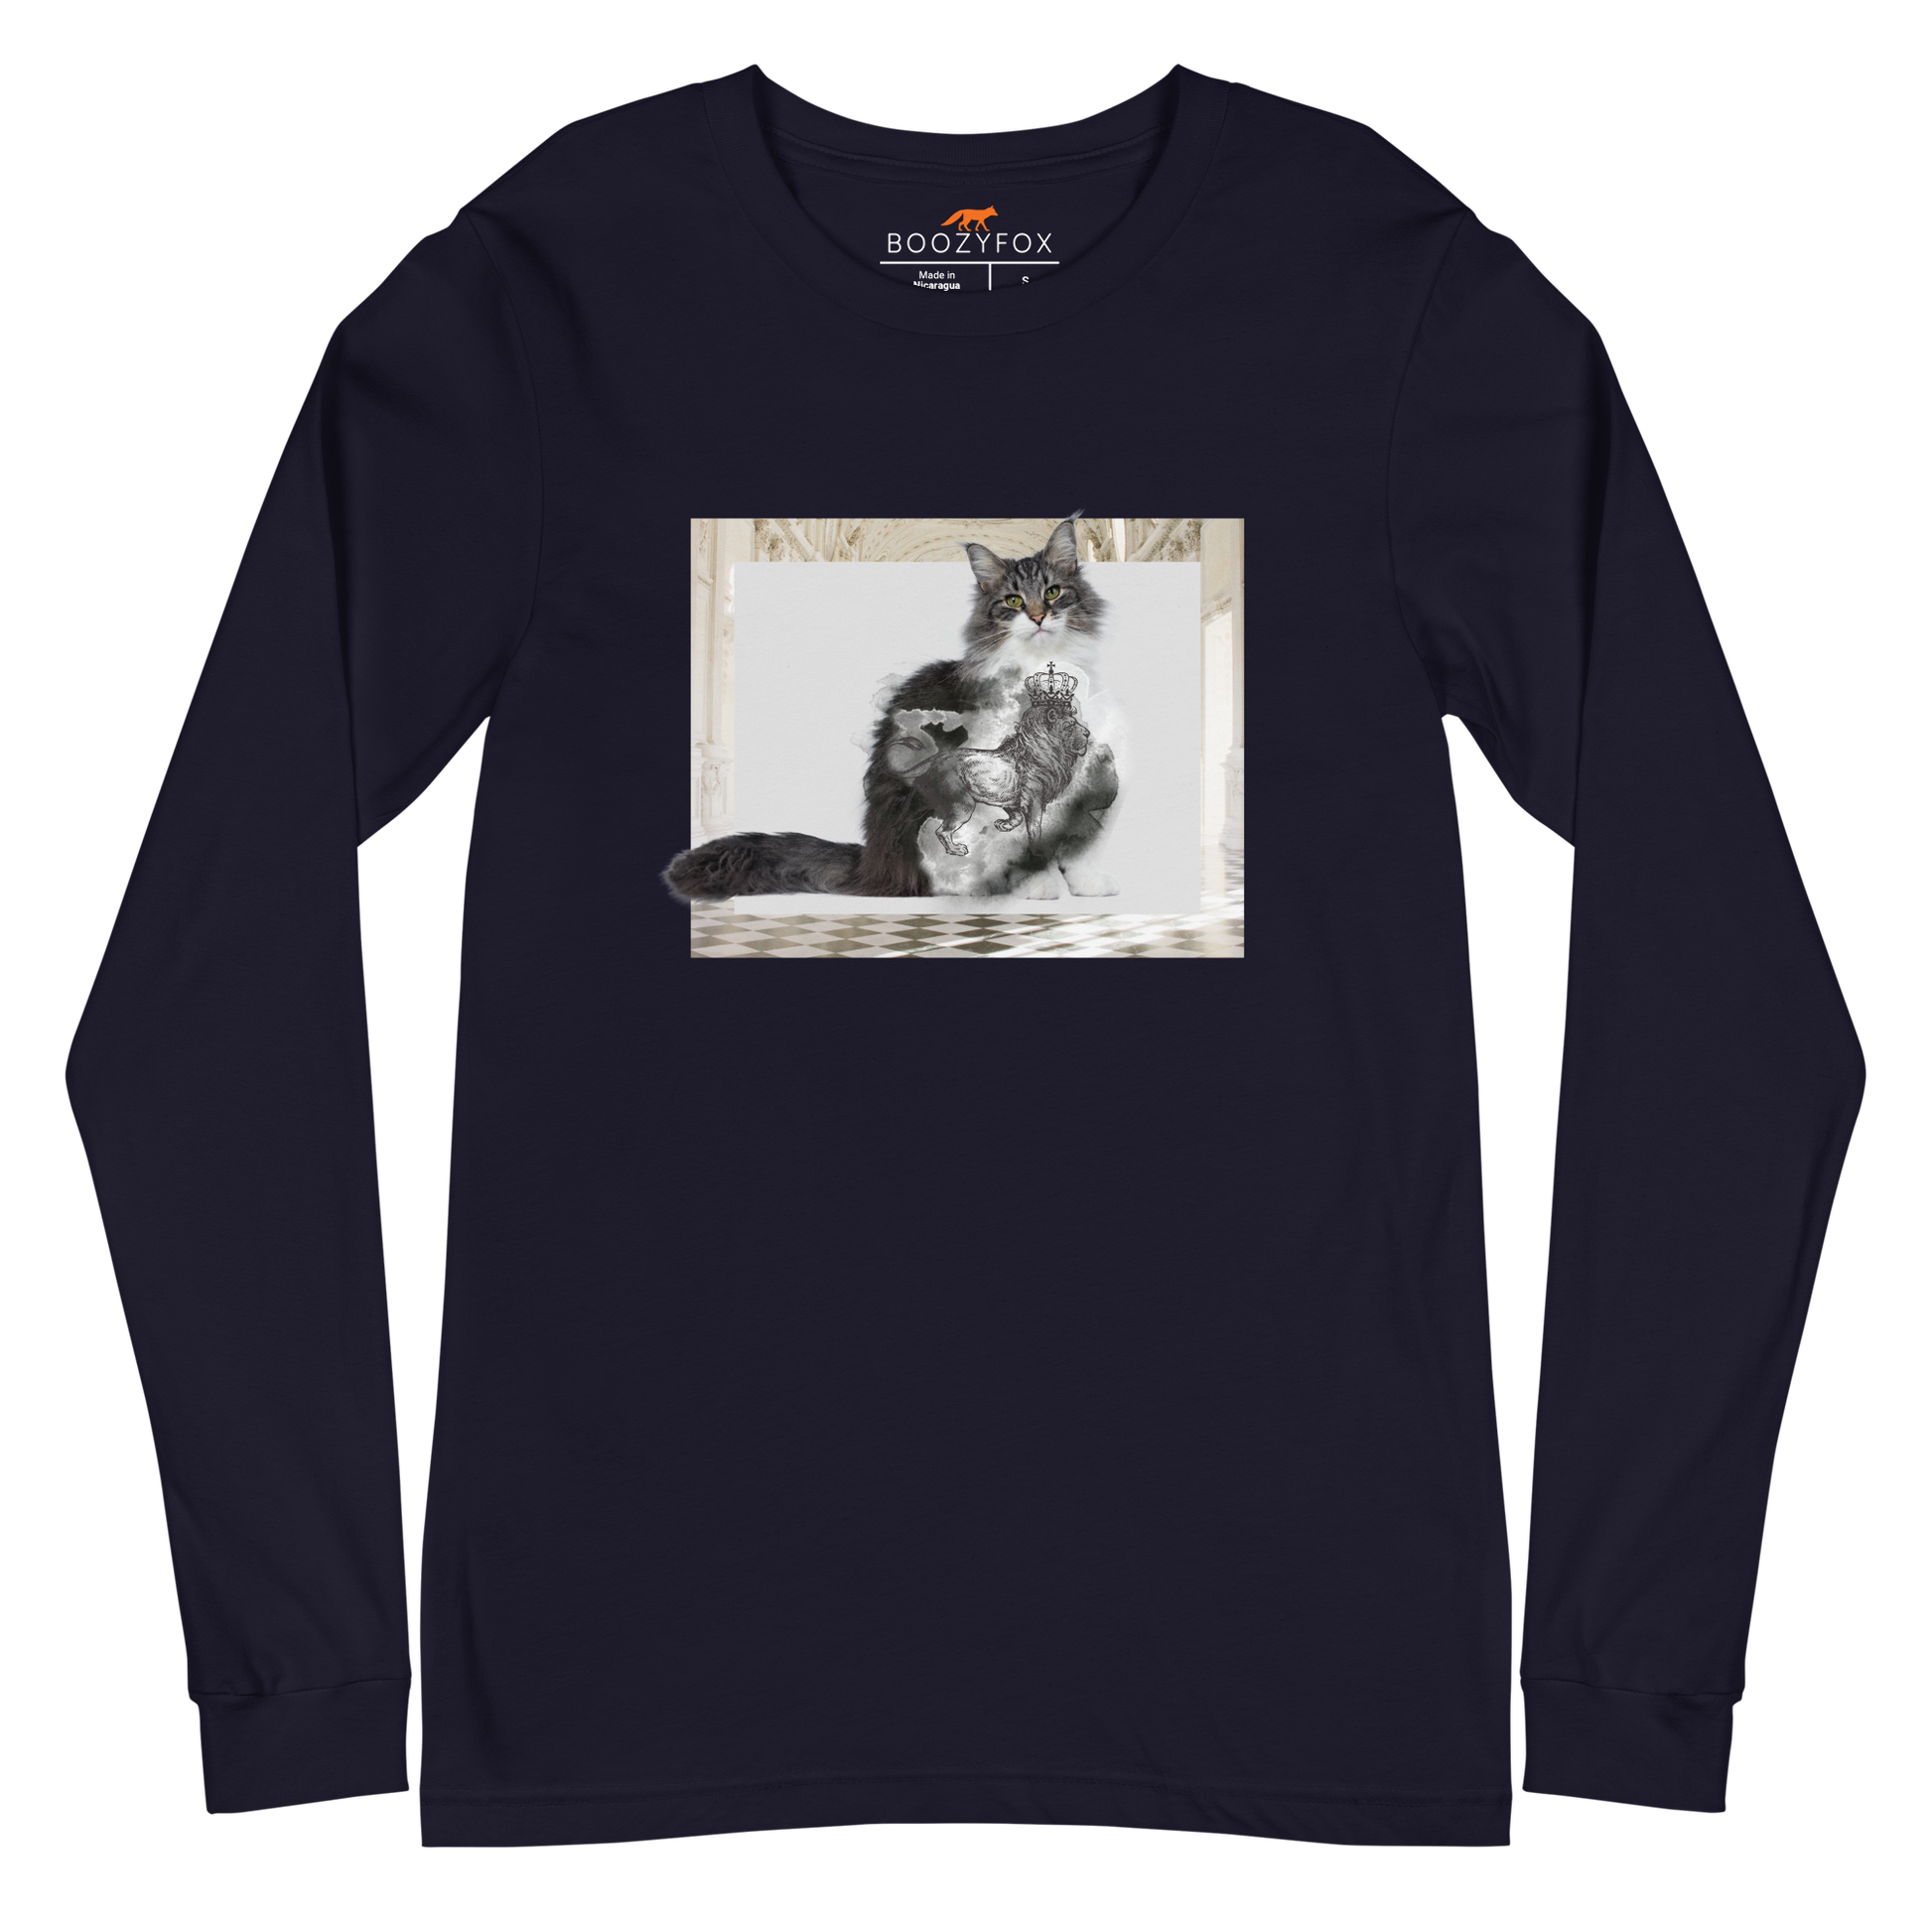 Navy Royal Cat Long Sleeve Tee featuring a Majestic Cat graphic on the chest - Cute Cat Long Sleeve Graphic Tees - Boozy Fox